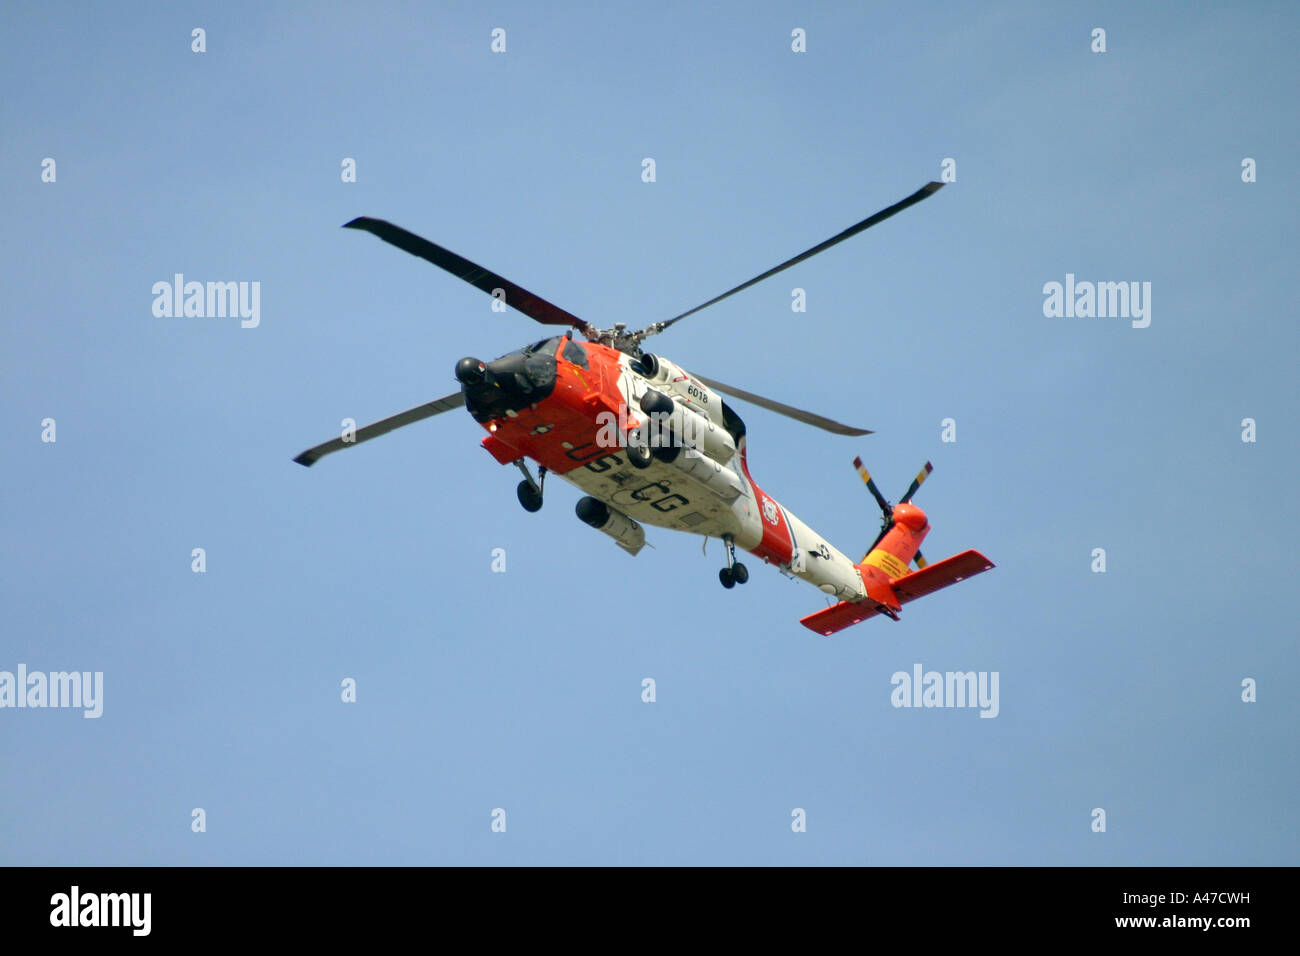 View from Below of United States Coast Guard Helicopter Stock Photo